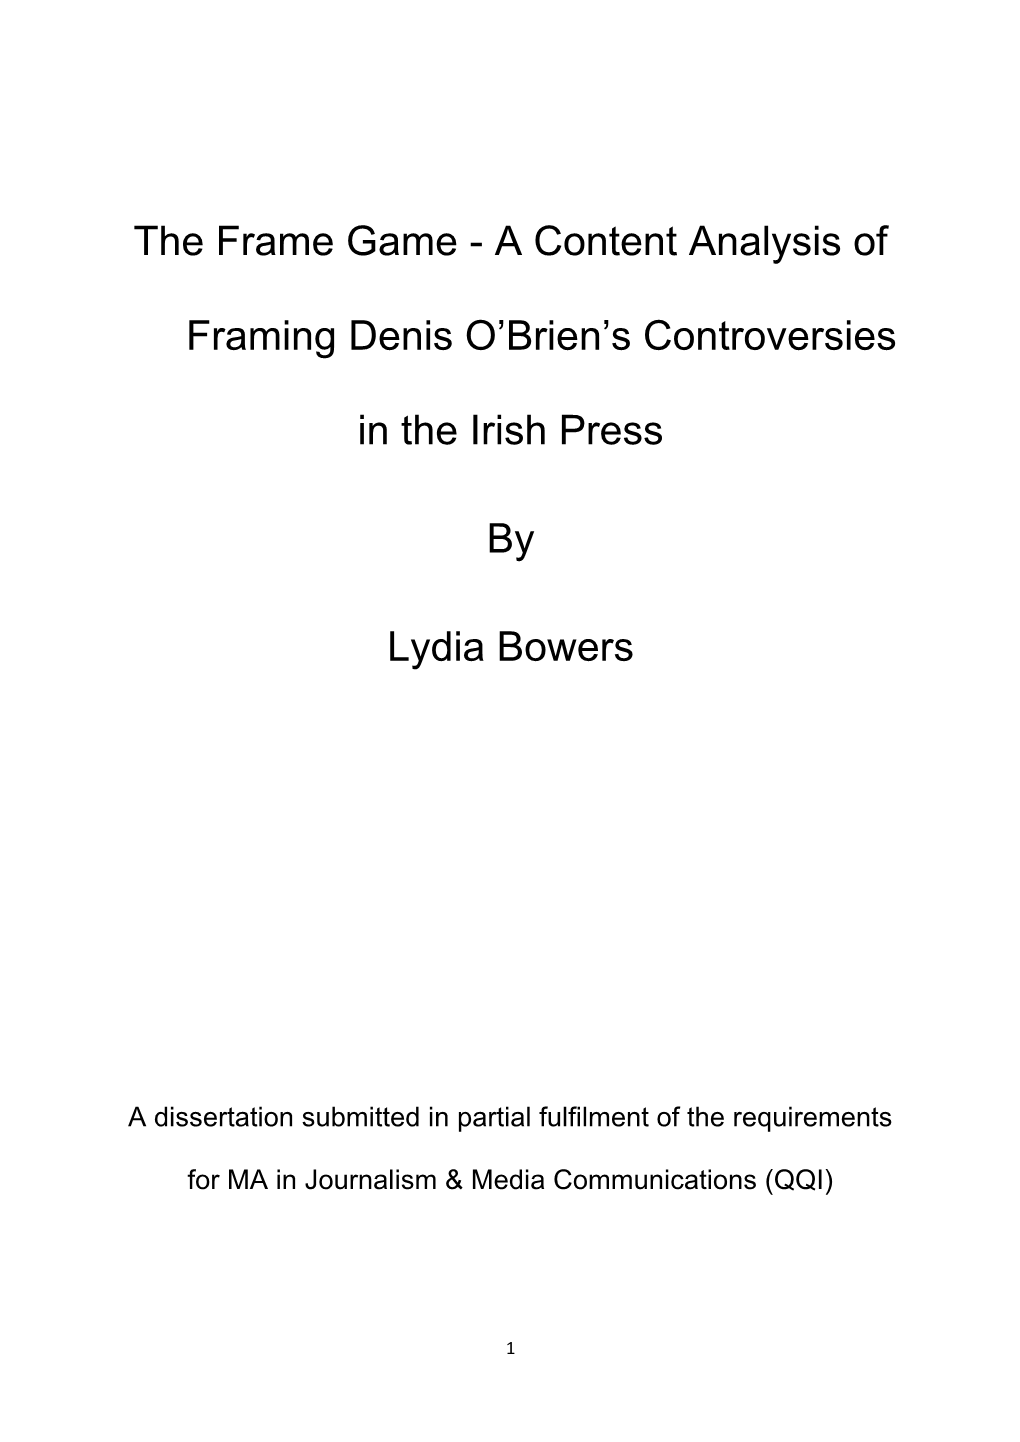 The Frame Game - a Content Analysis Of